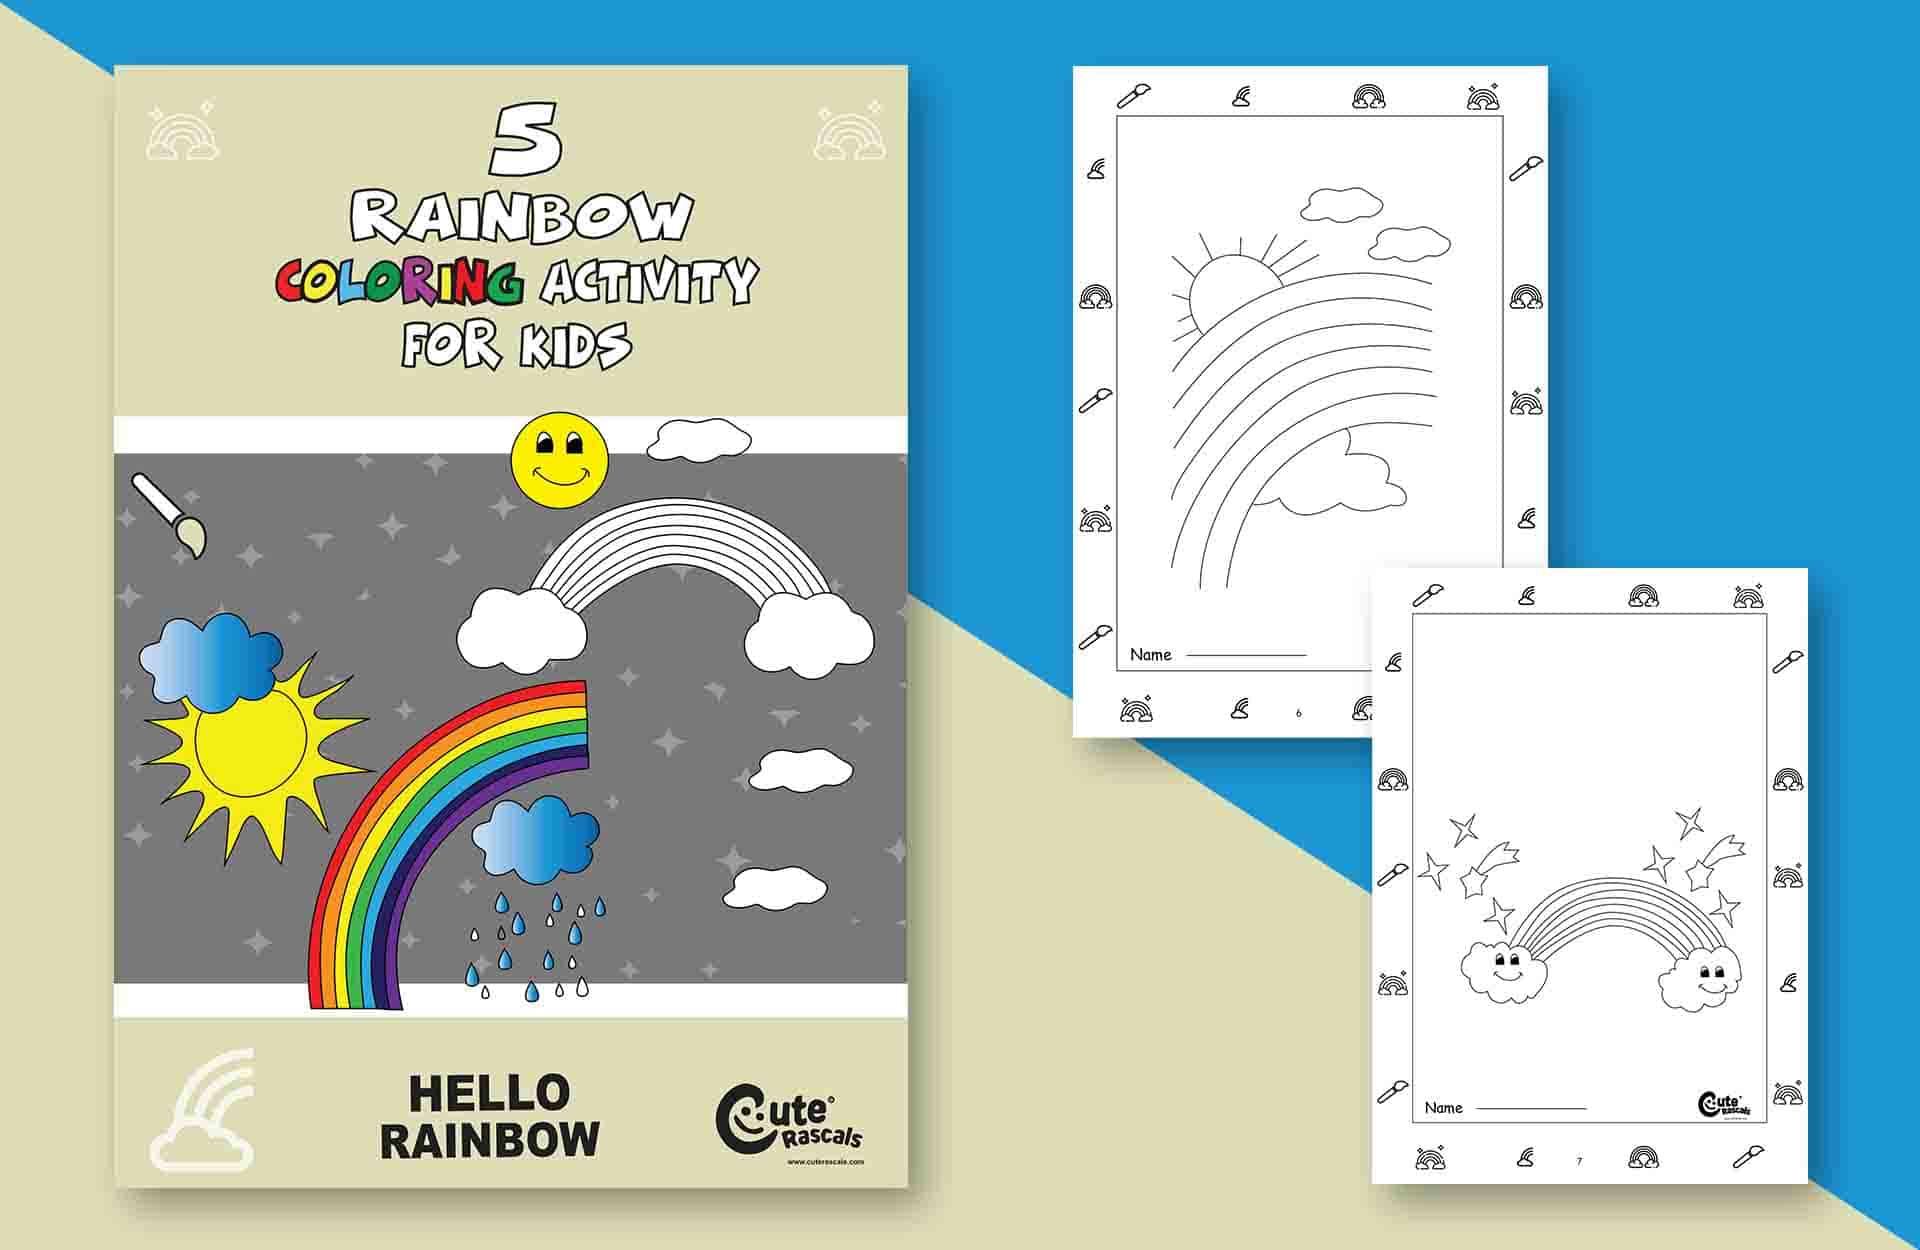 Magical Rainbow Coloring Pages for Kids (5 Unique Rainbows)